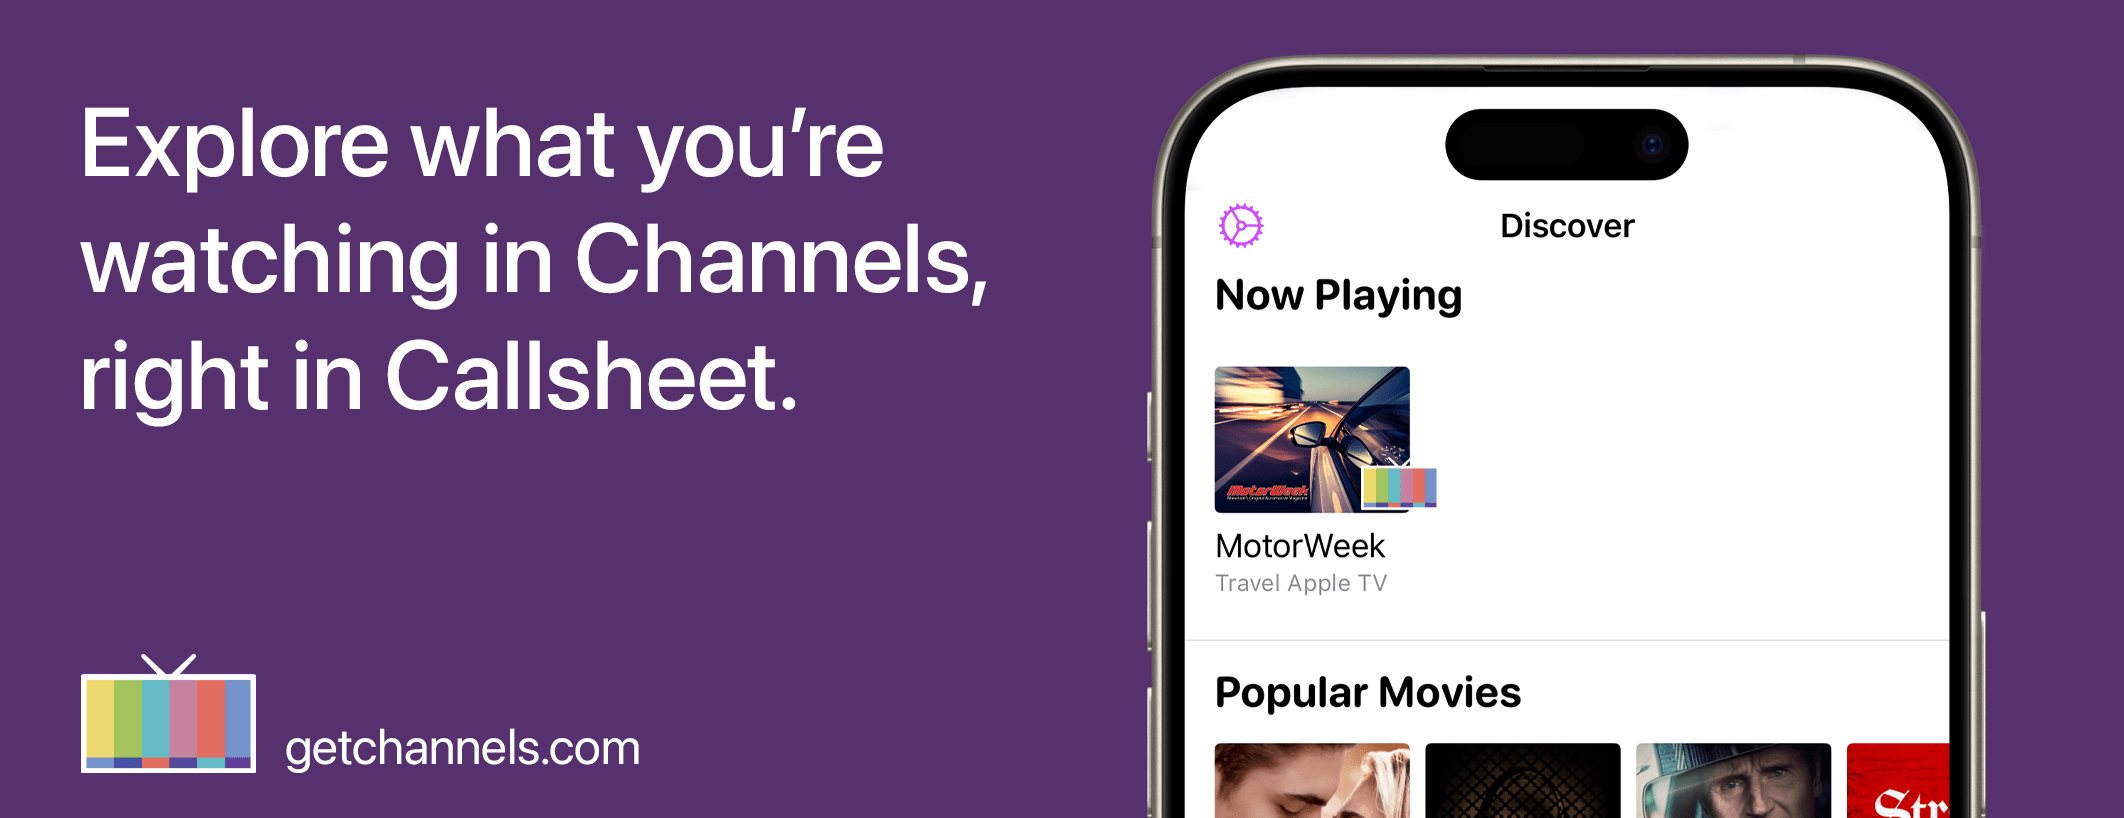 explore what you're watching in Channels inside Callsheet